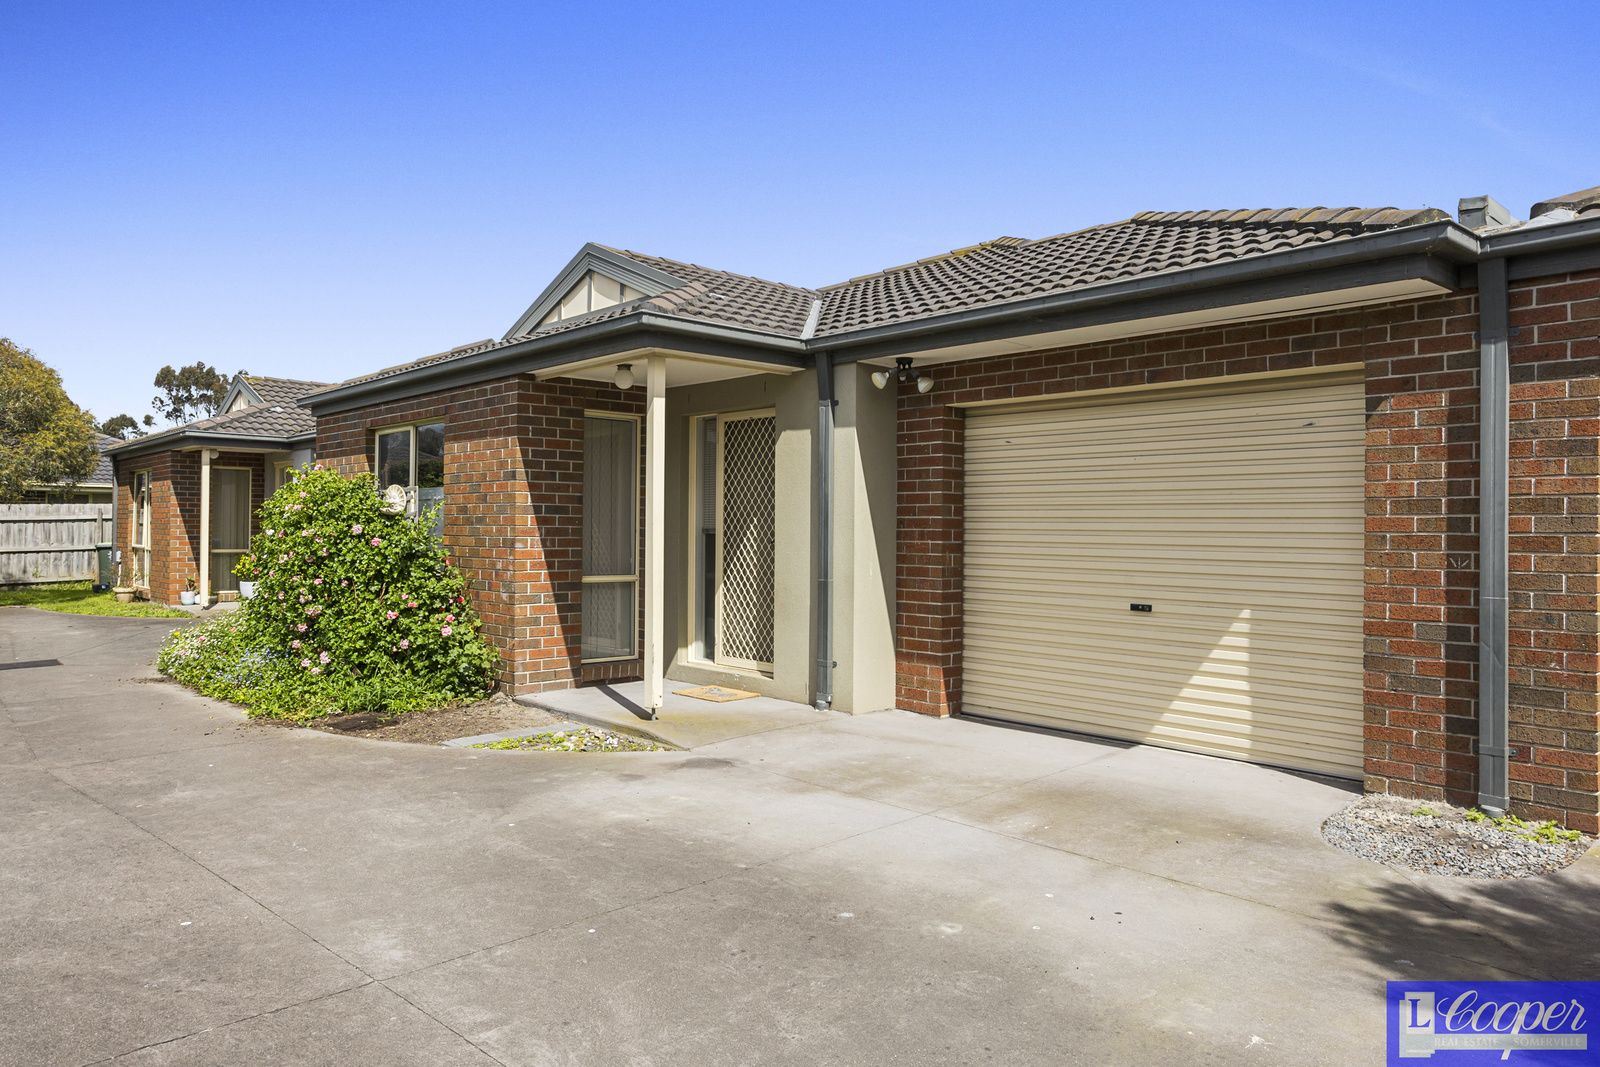 2 bedrooms House in 2/11 Dylan Drive HASTINGS VIC, 3915